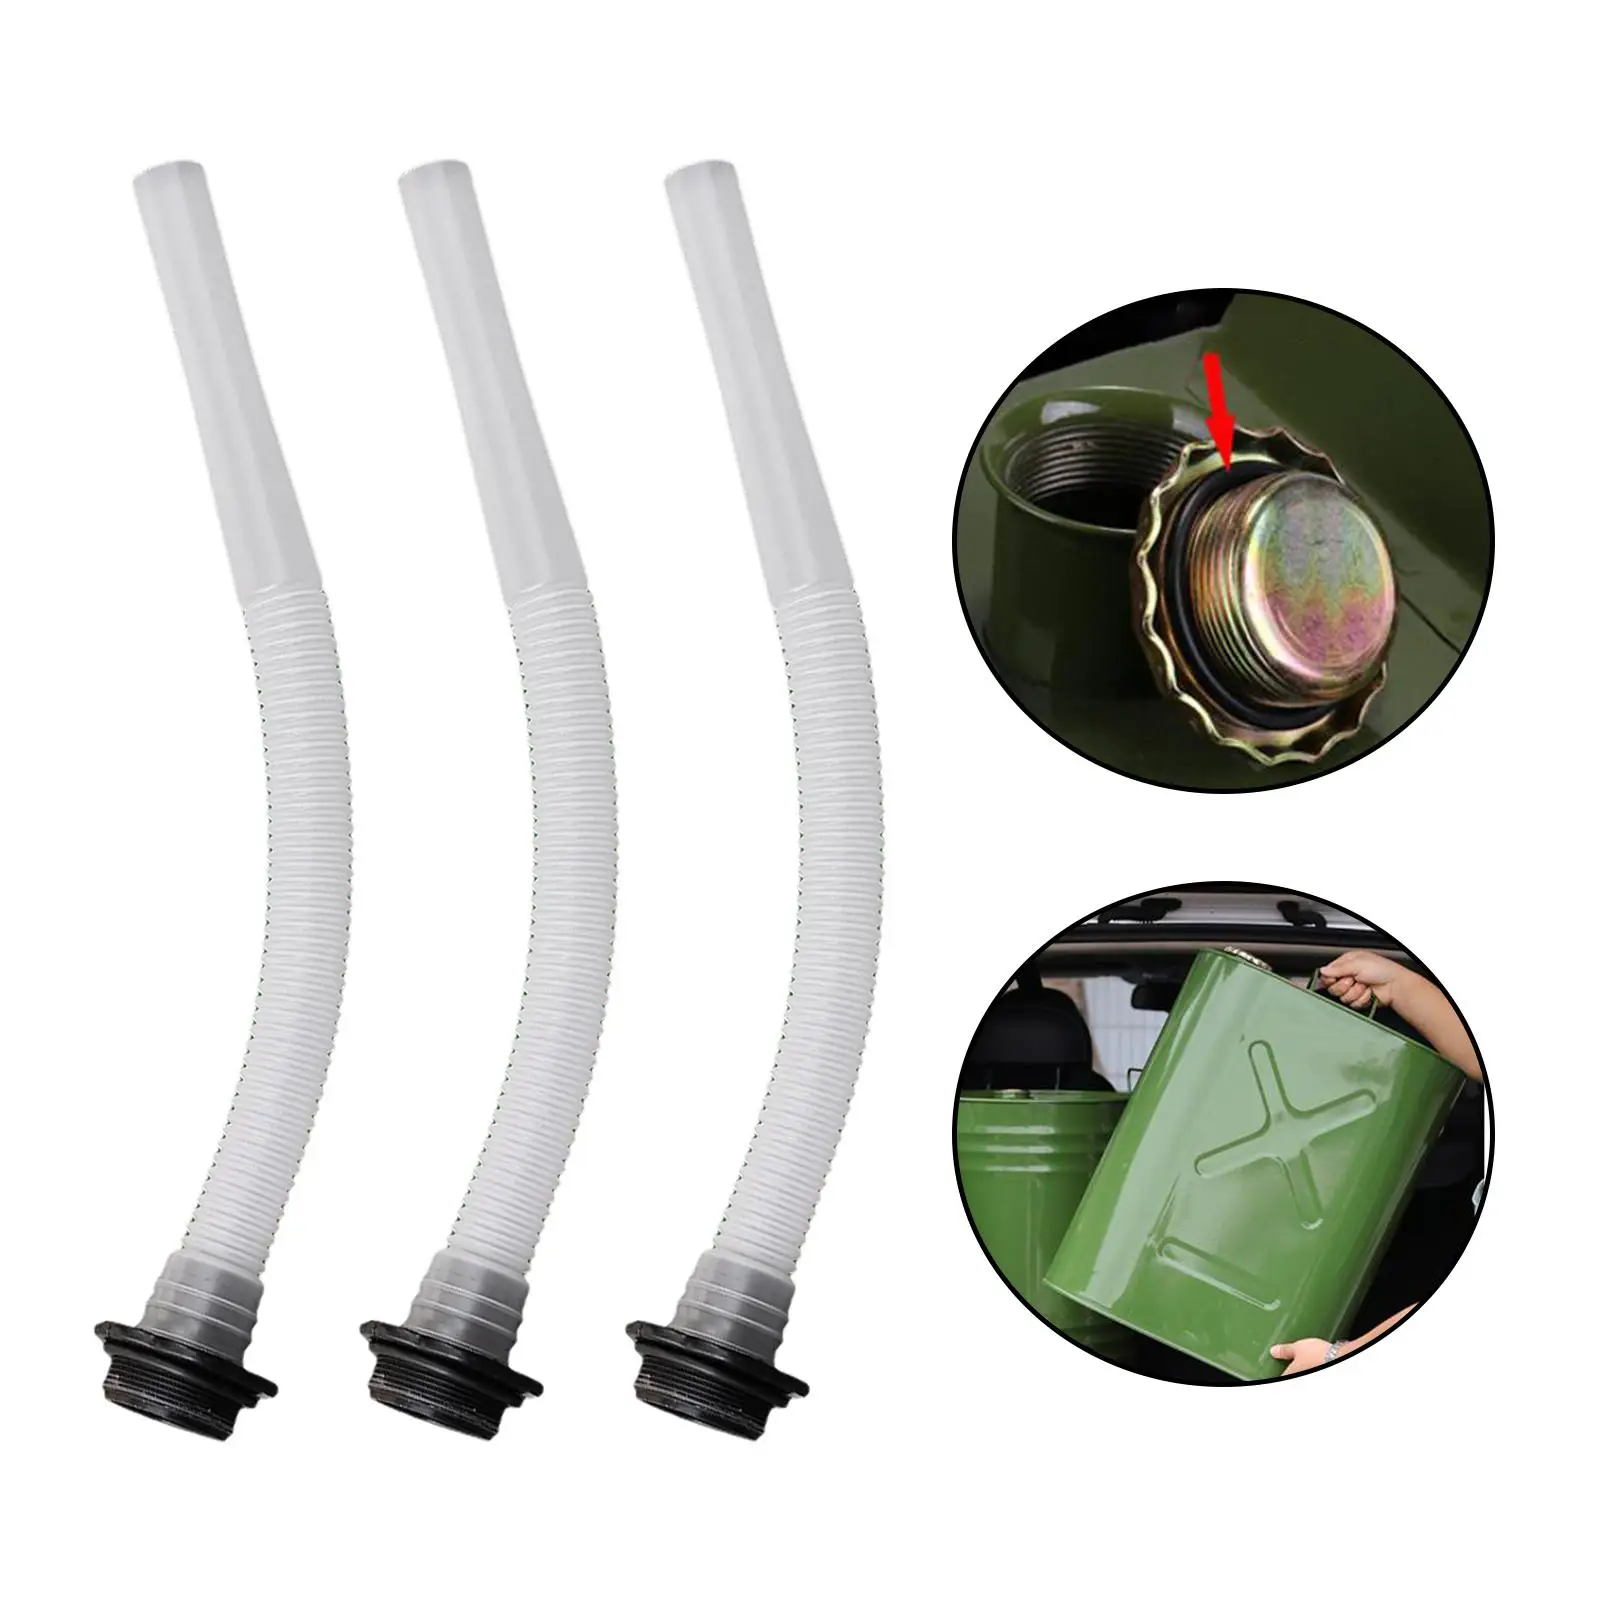 3Pcs Durable Fuel Tanks Nozzle Motorcycle Parts Leakproof Sealing Vehicle Equipment Petrol Can Flexible Tube Oil Container Pipe